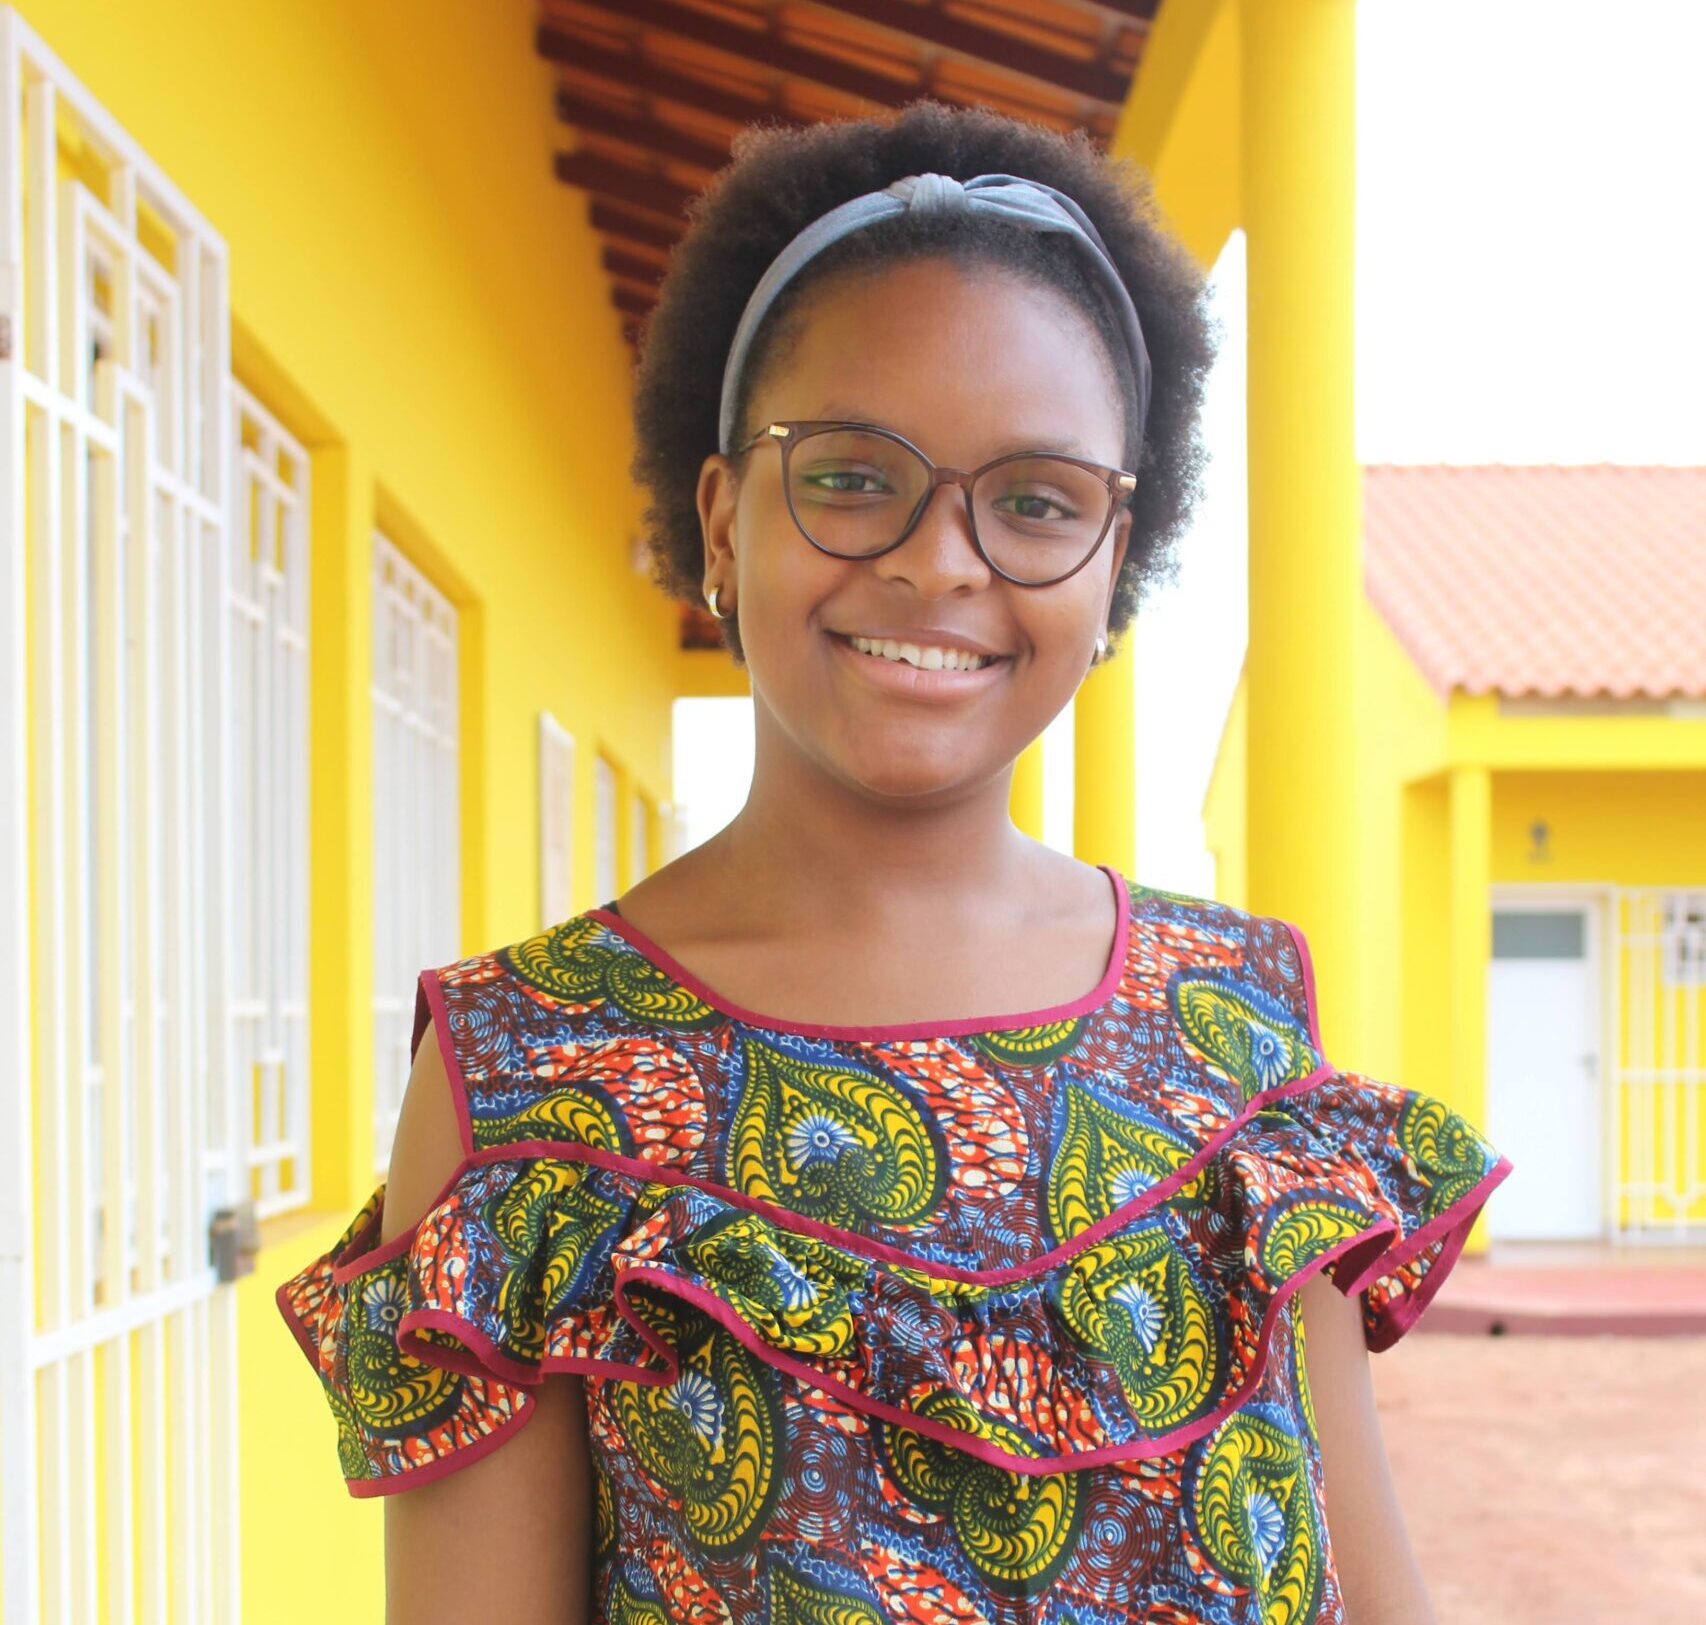 IT Student at the WAVS vocational school in Guinea-Bissau West Africa